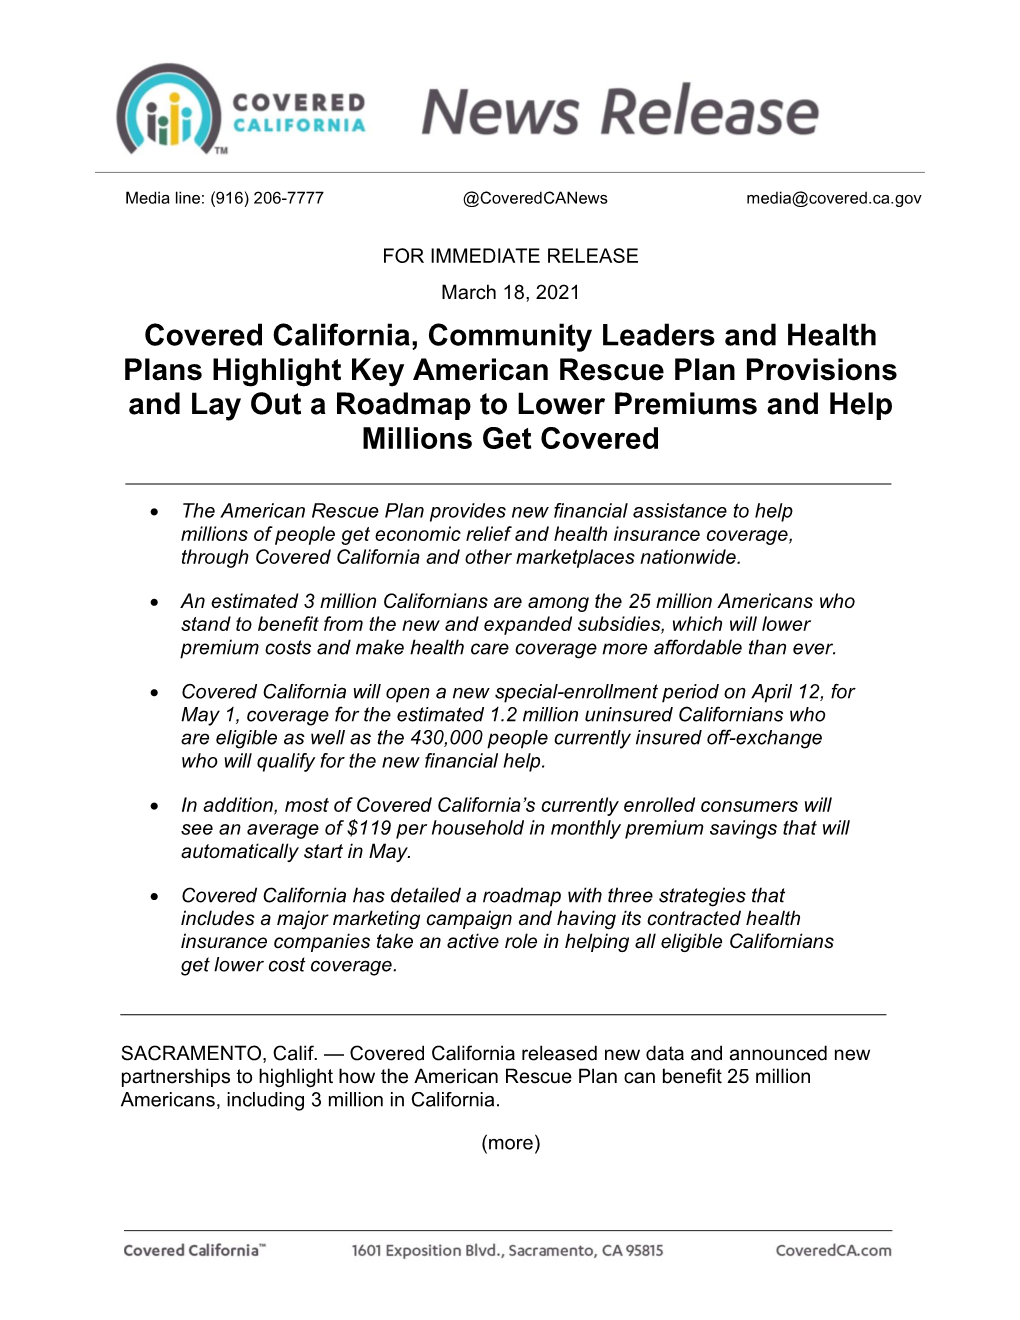 Covered California, Community Leaders and Health Plans Highlight